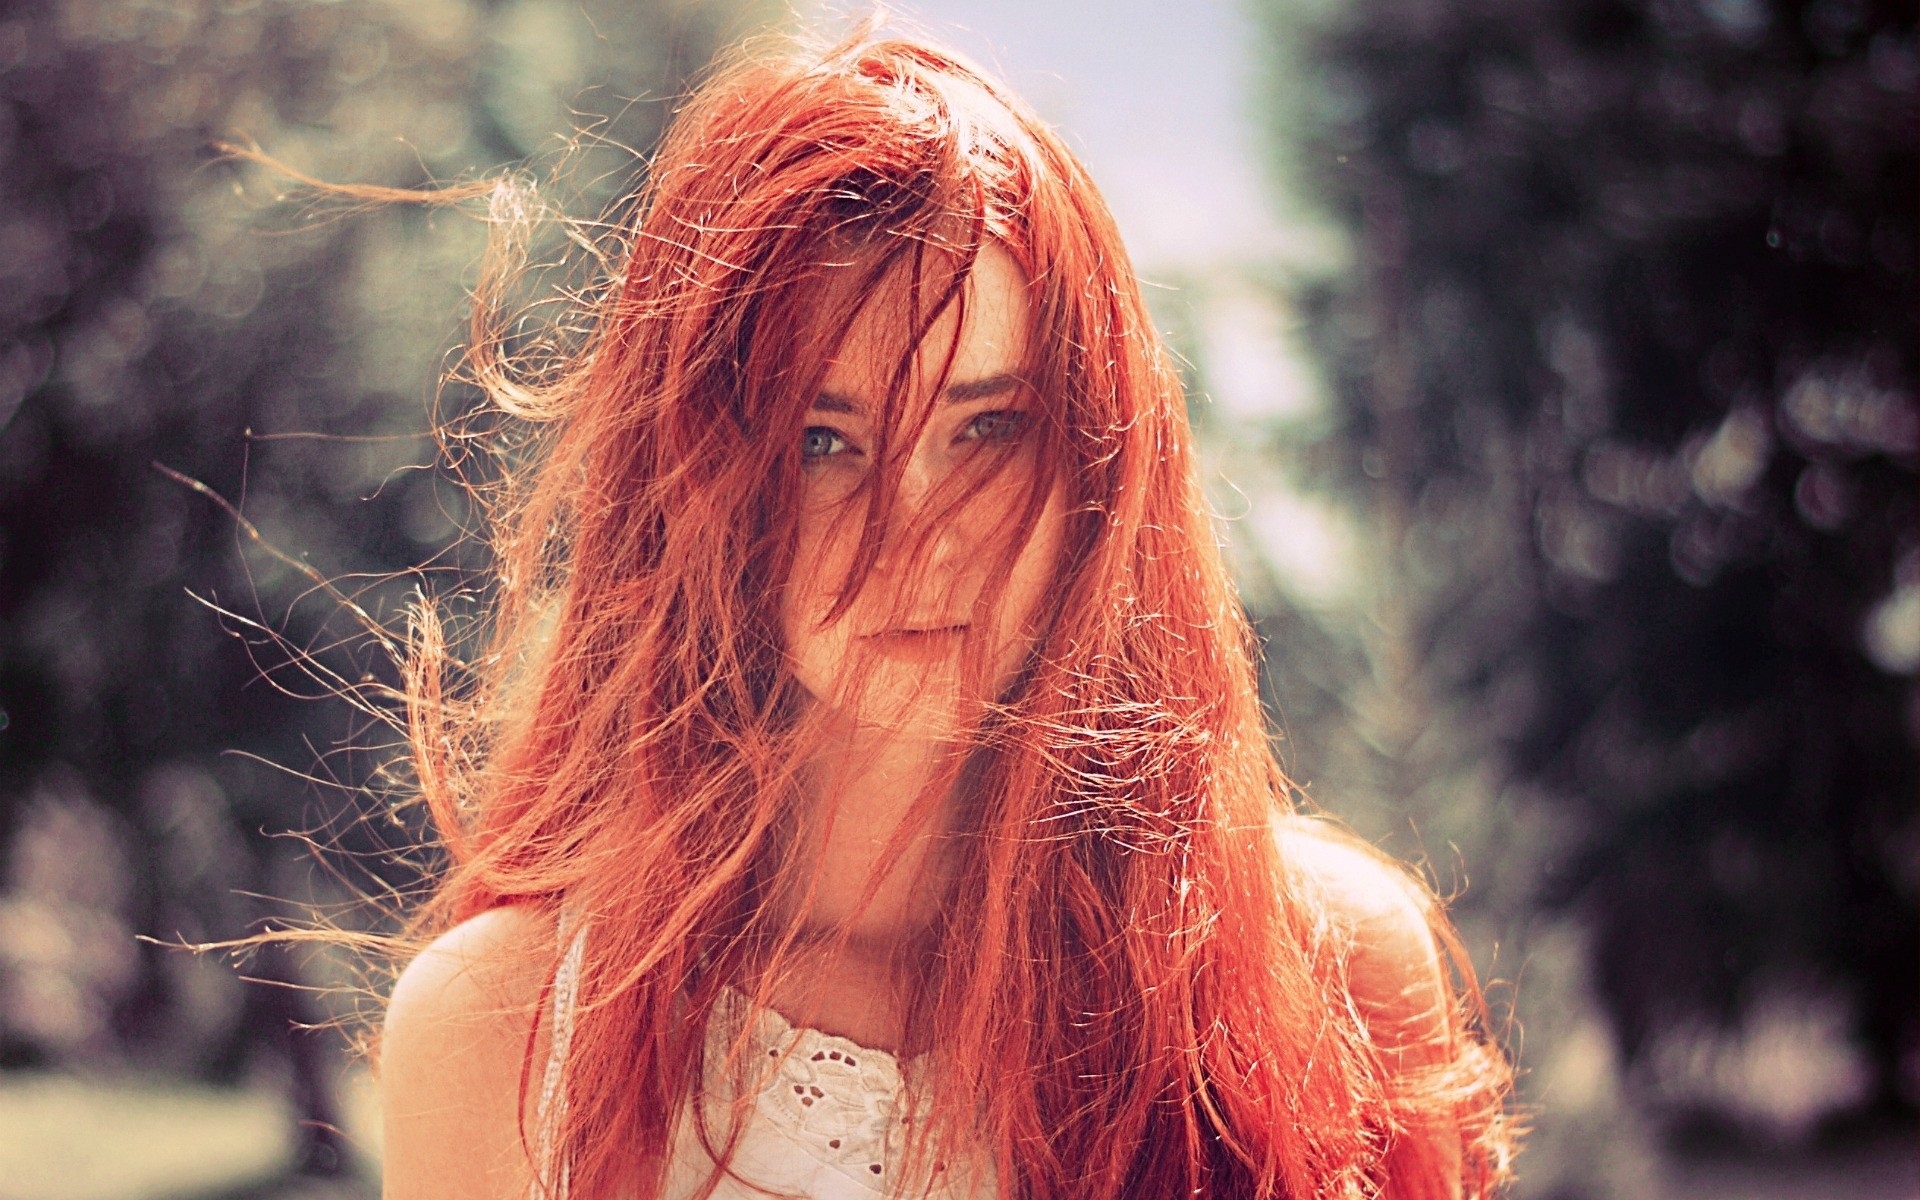 Free photo Red-haired girl with facial hair